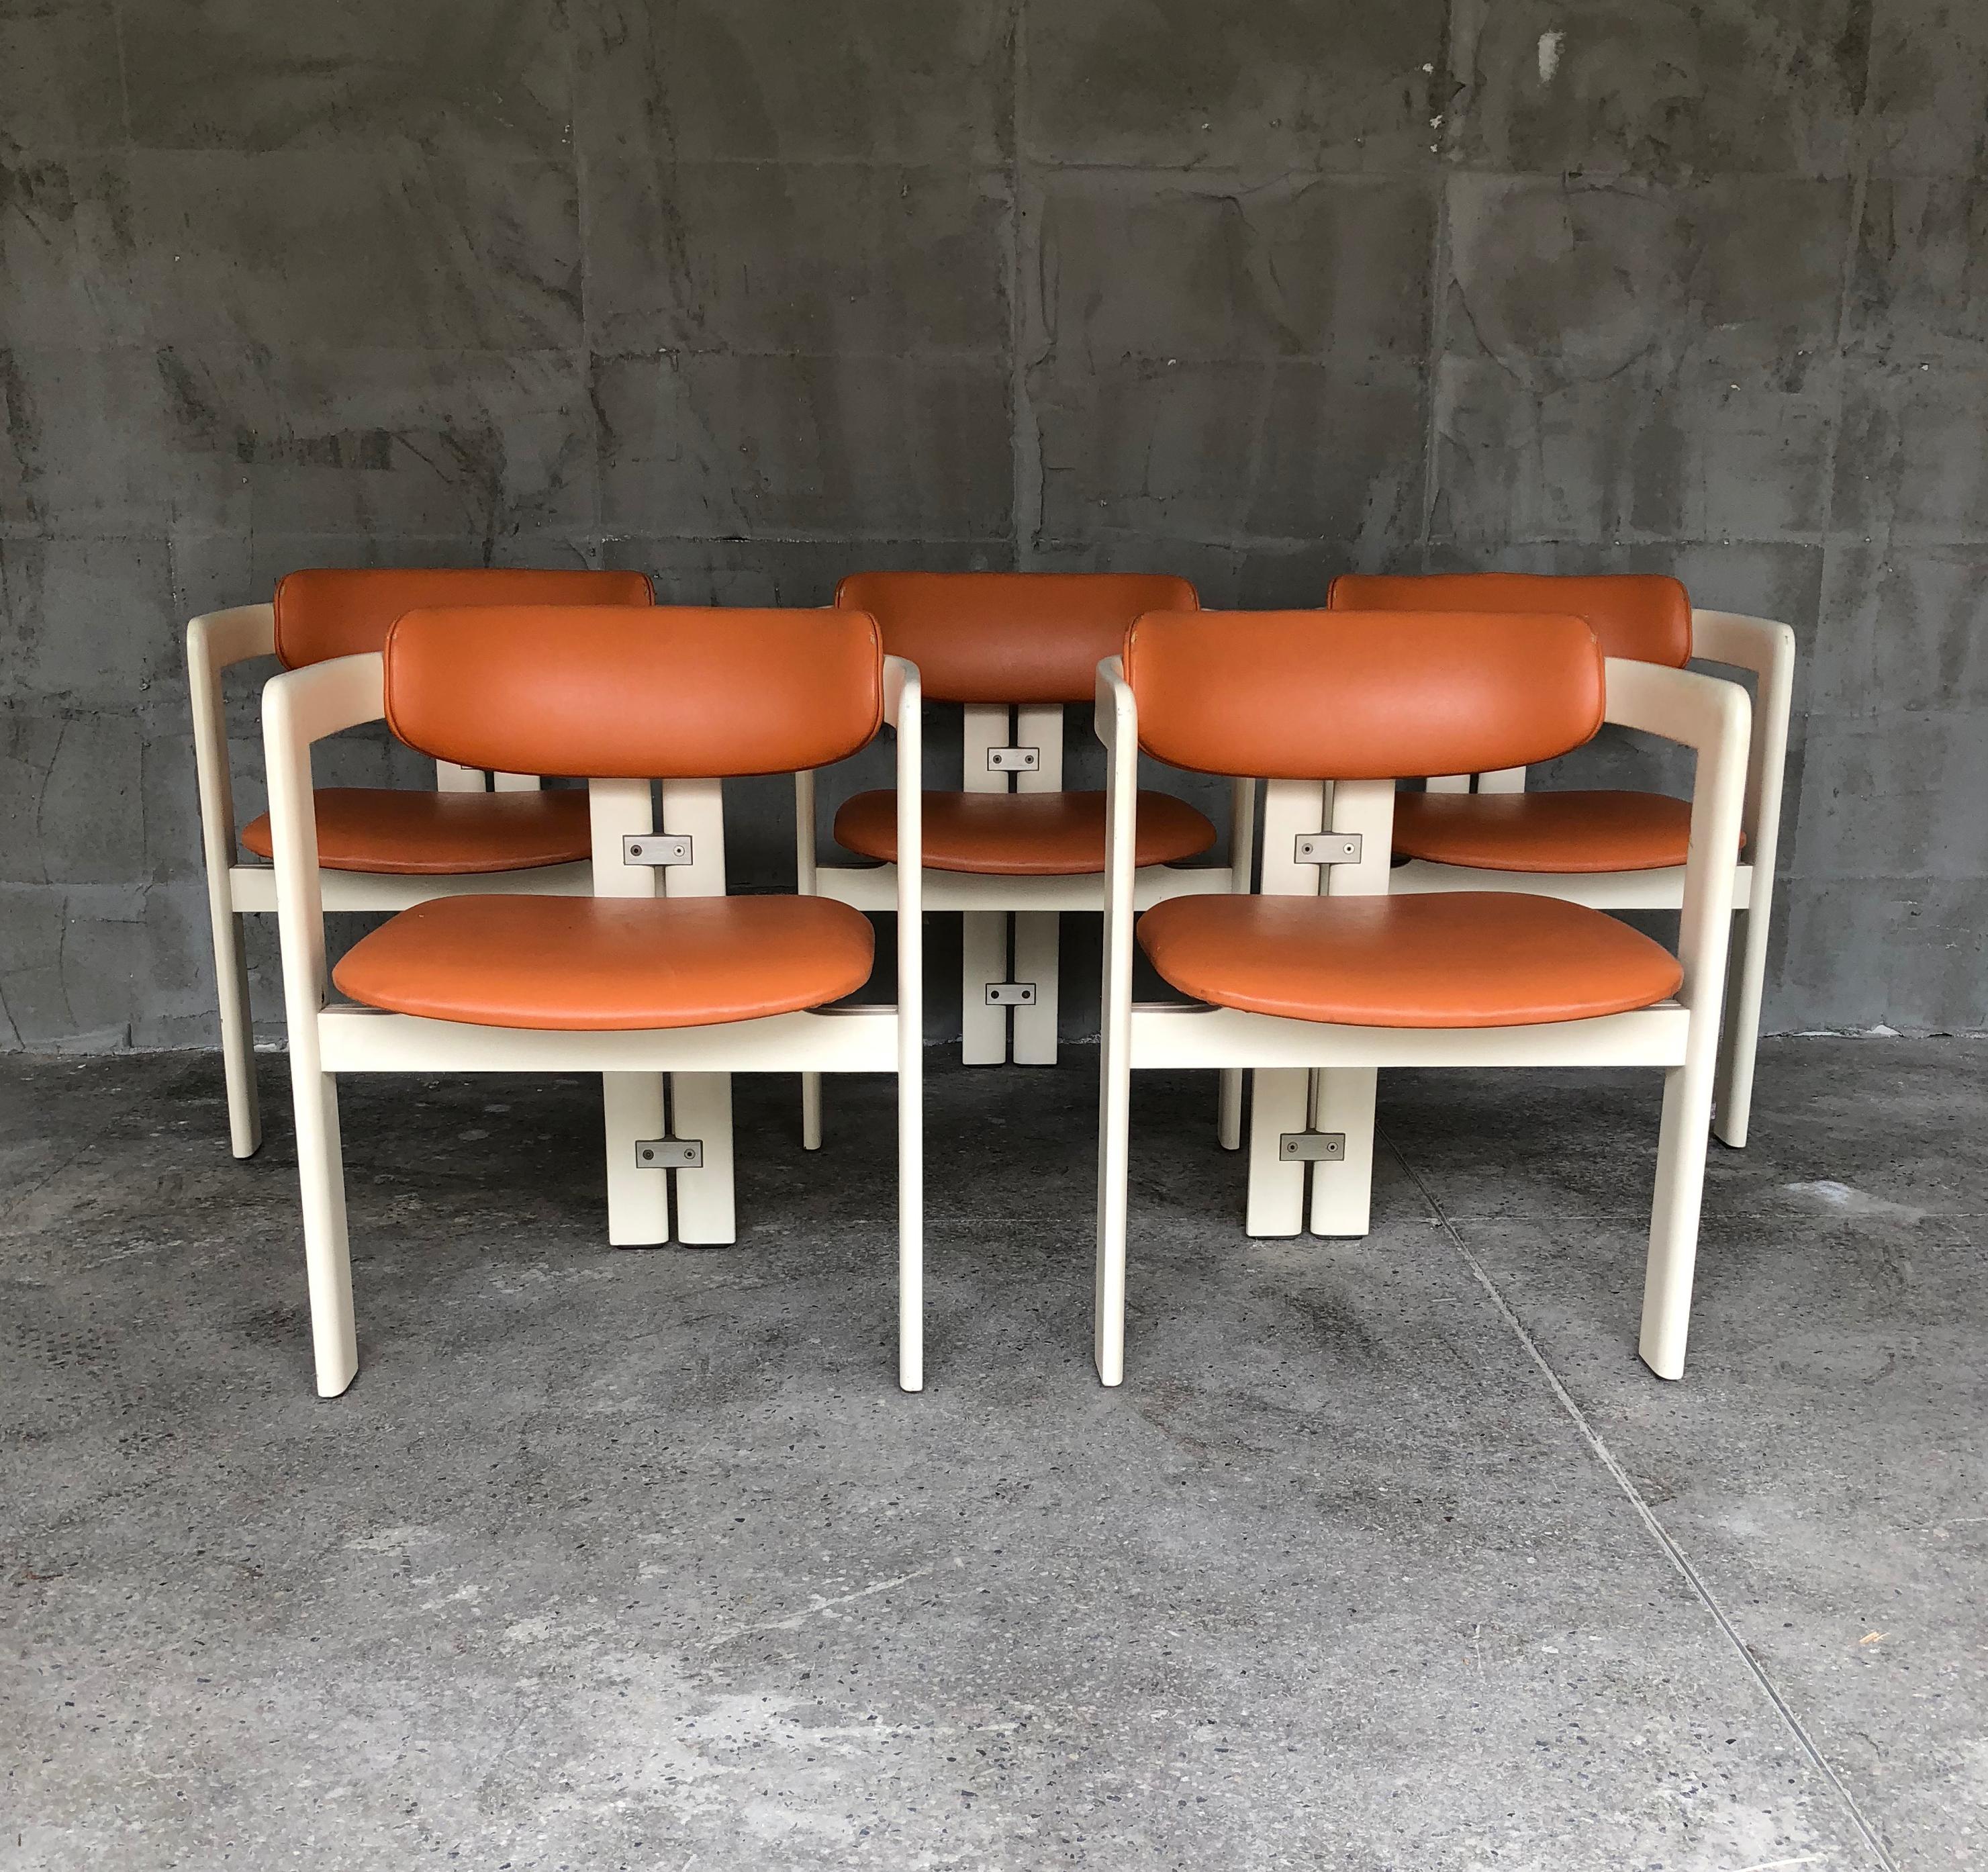 Stylish set of 5 Pamplona armchairs by Italian designer Augusto Savini made in Italy in the 1960's. The chairs are 6, but the six must be reupholstered. It is given as a bonus to the other five. They have lacquered in ivory white wooden frames,